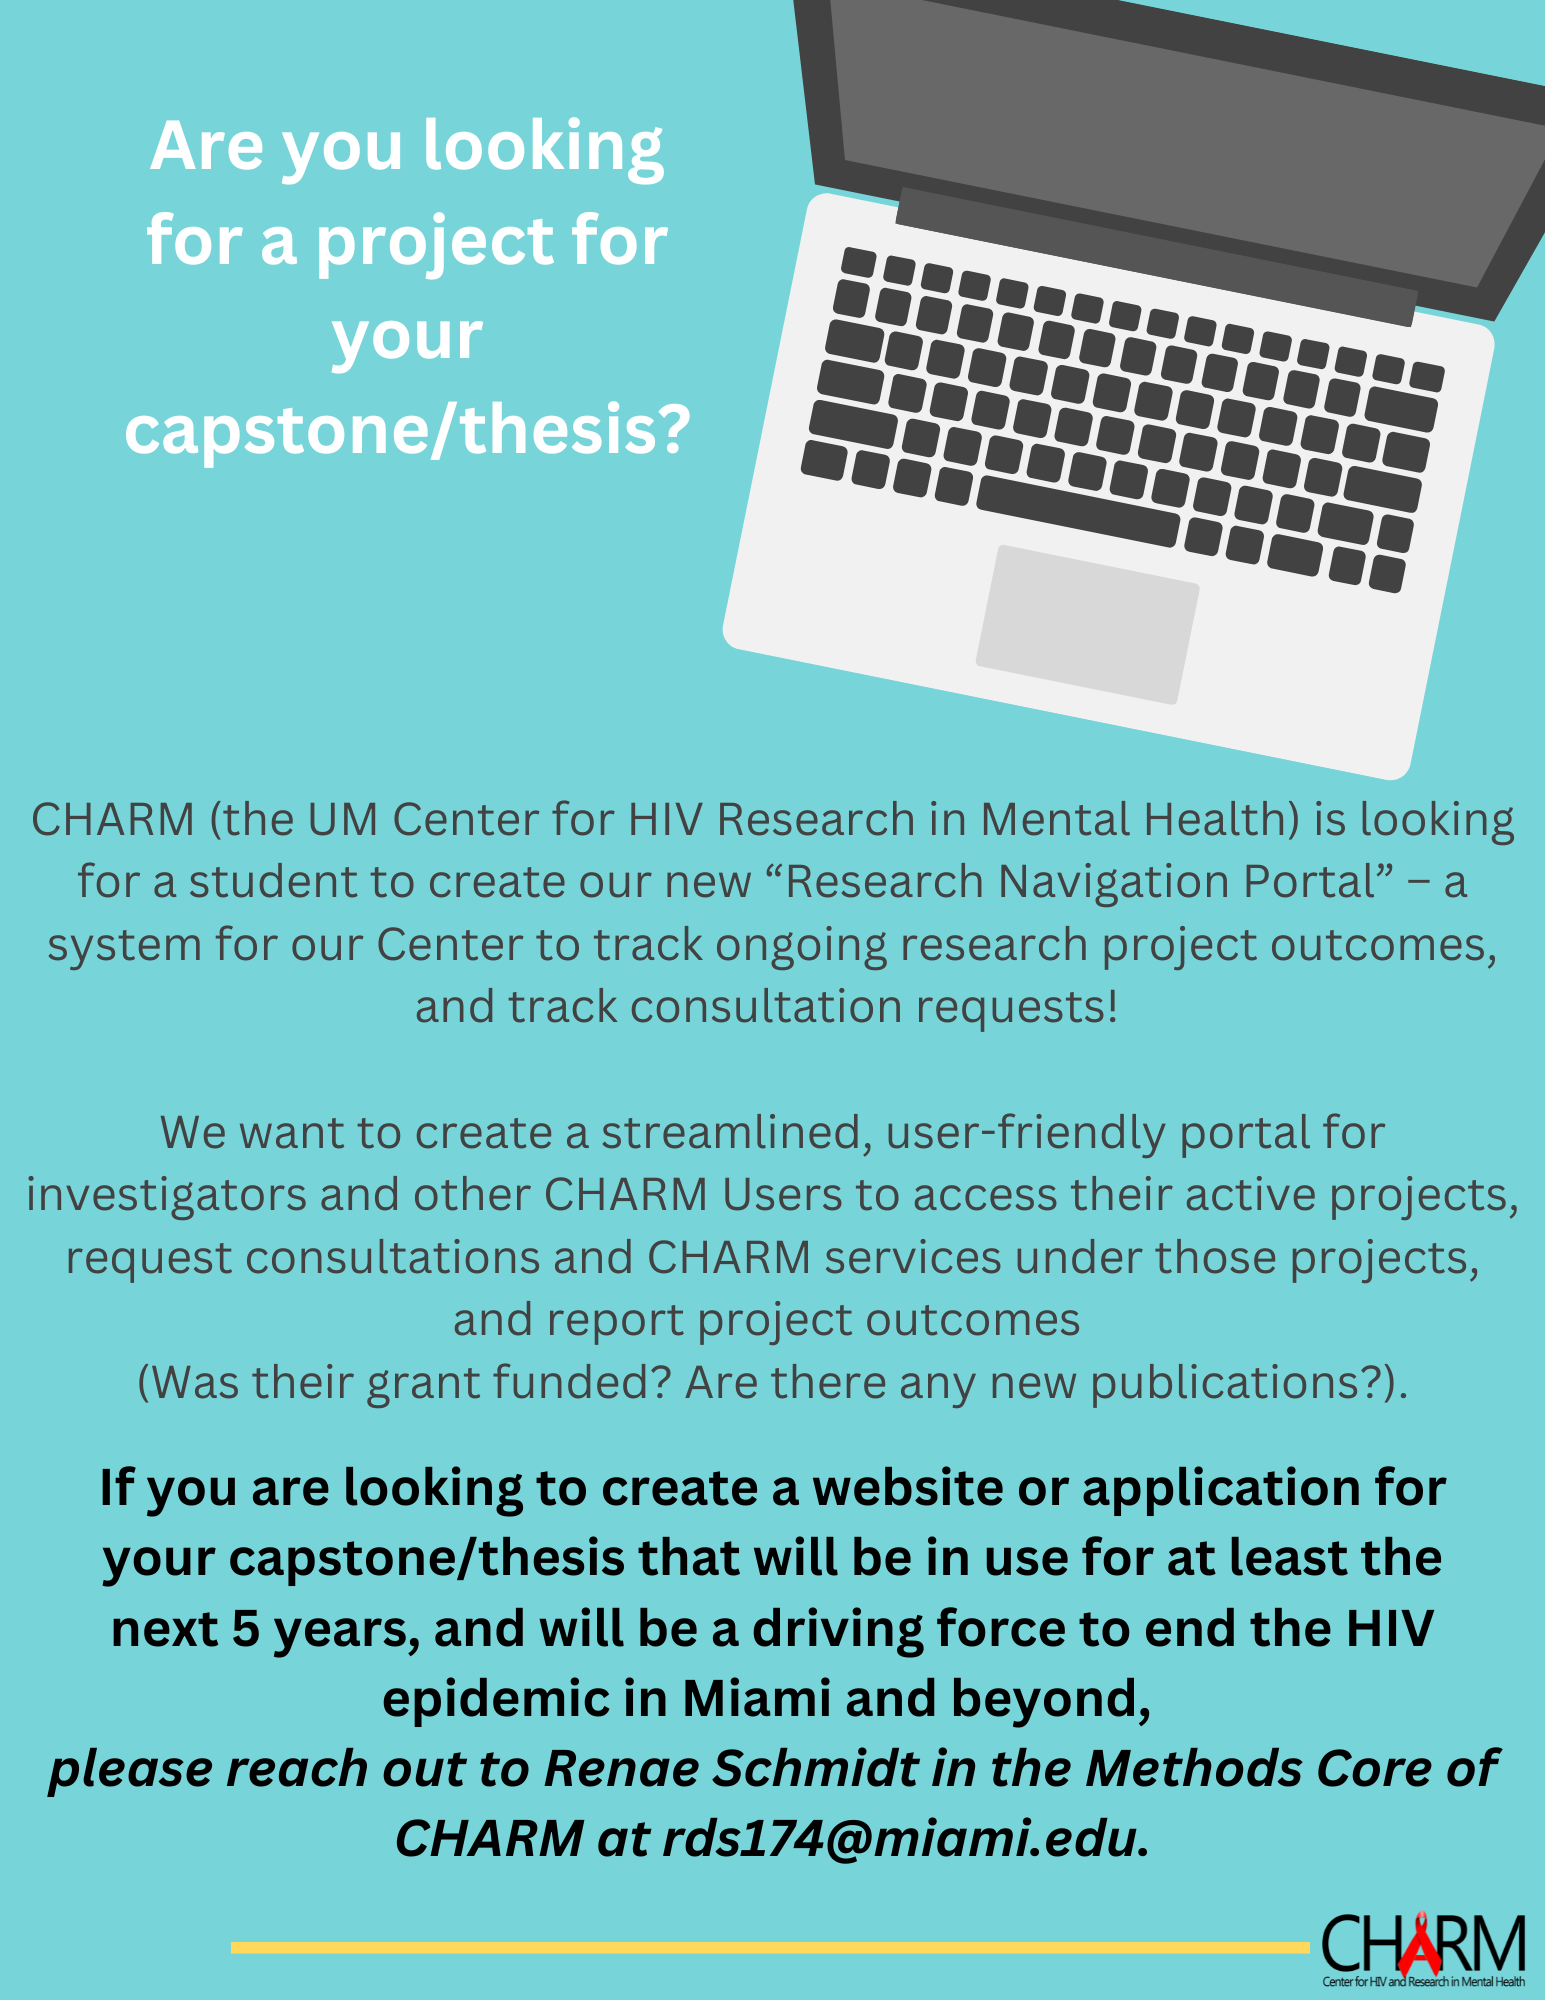 Make an HIV Research Portal for your Capstone/Thesis project.